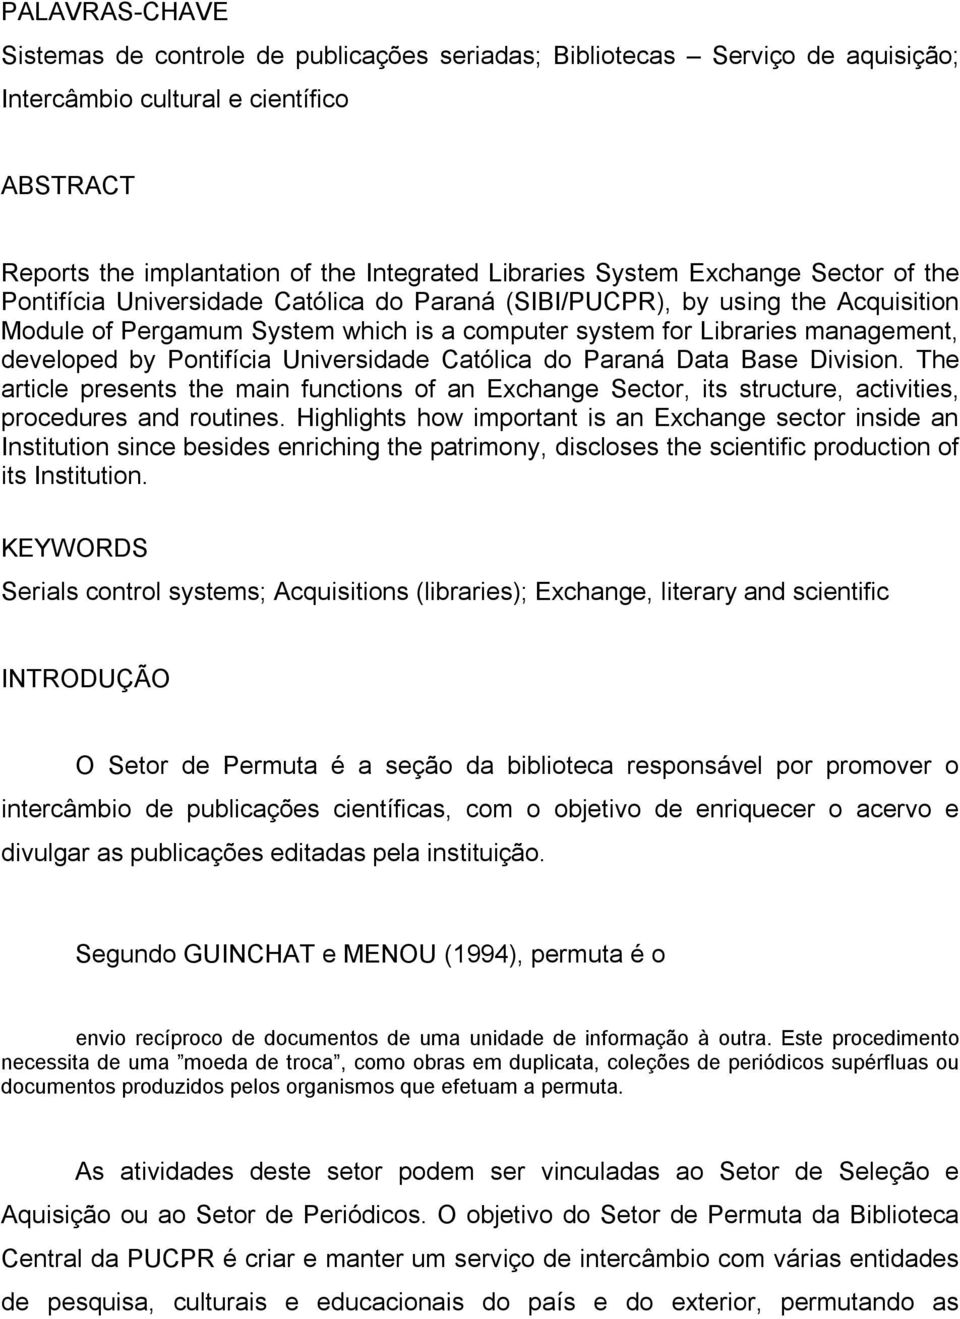 Pontifícia Universidade Católica do Paraná Data Base Division. The article presents the main functions of an Exchange Sector, its structure, activities, procedures and routines.